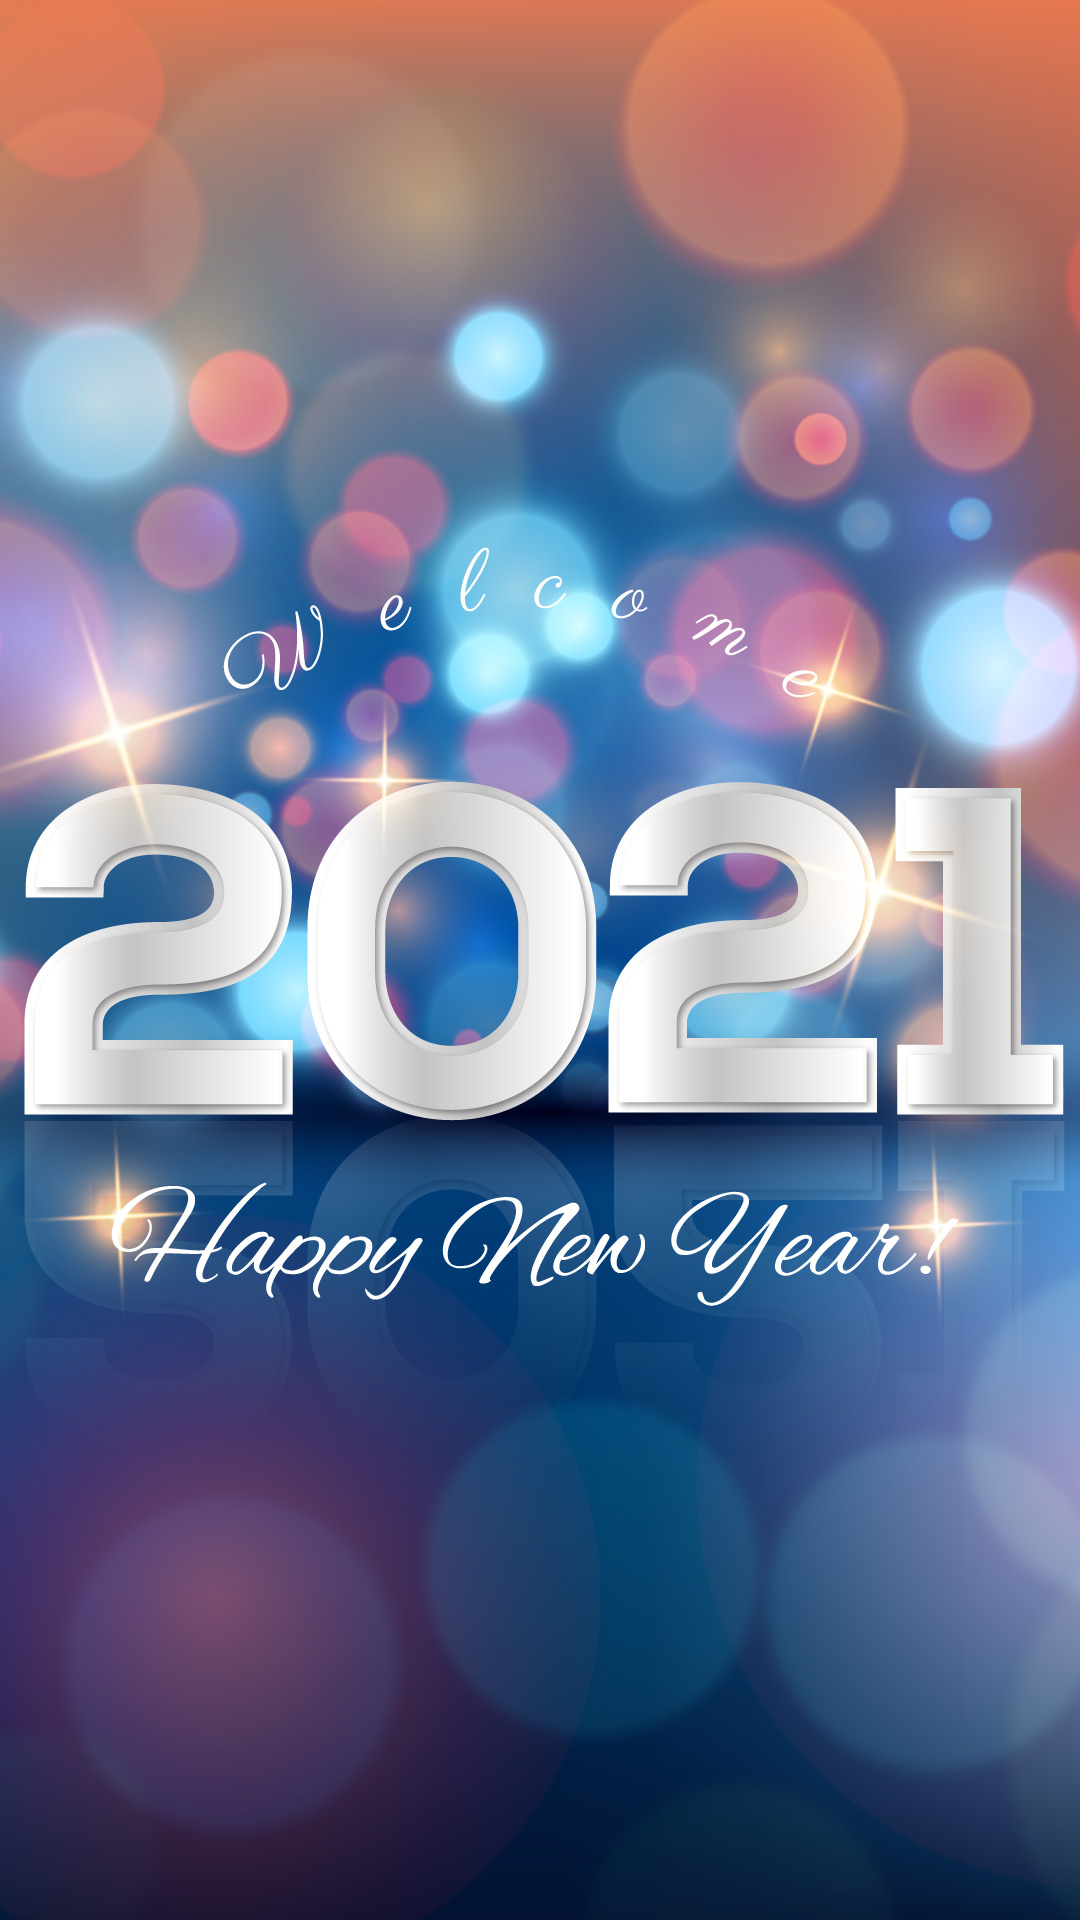 Aesthetic New Year Wallpapers 2021 - Draw-u